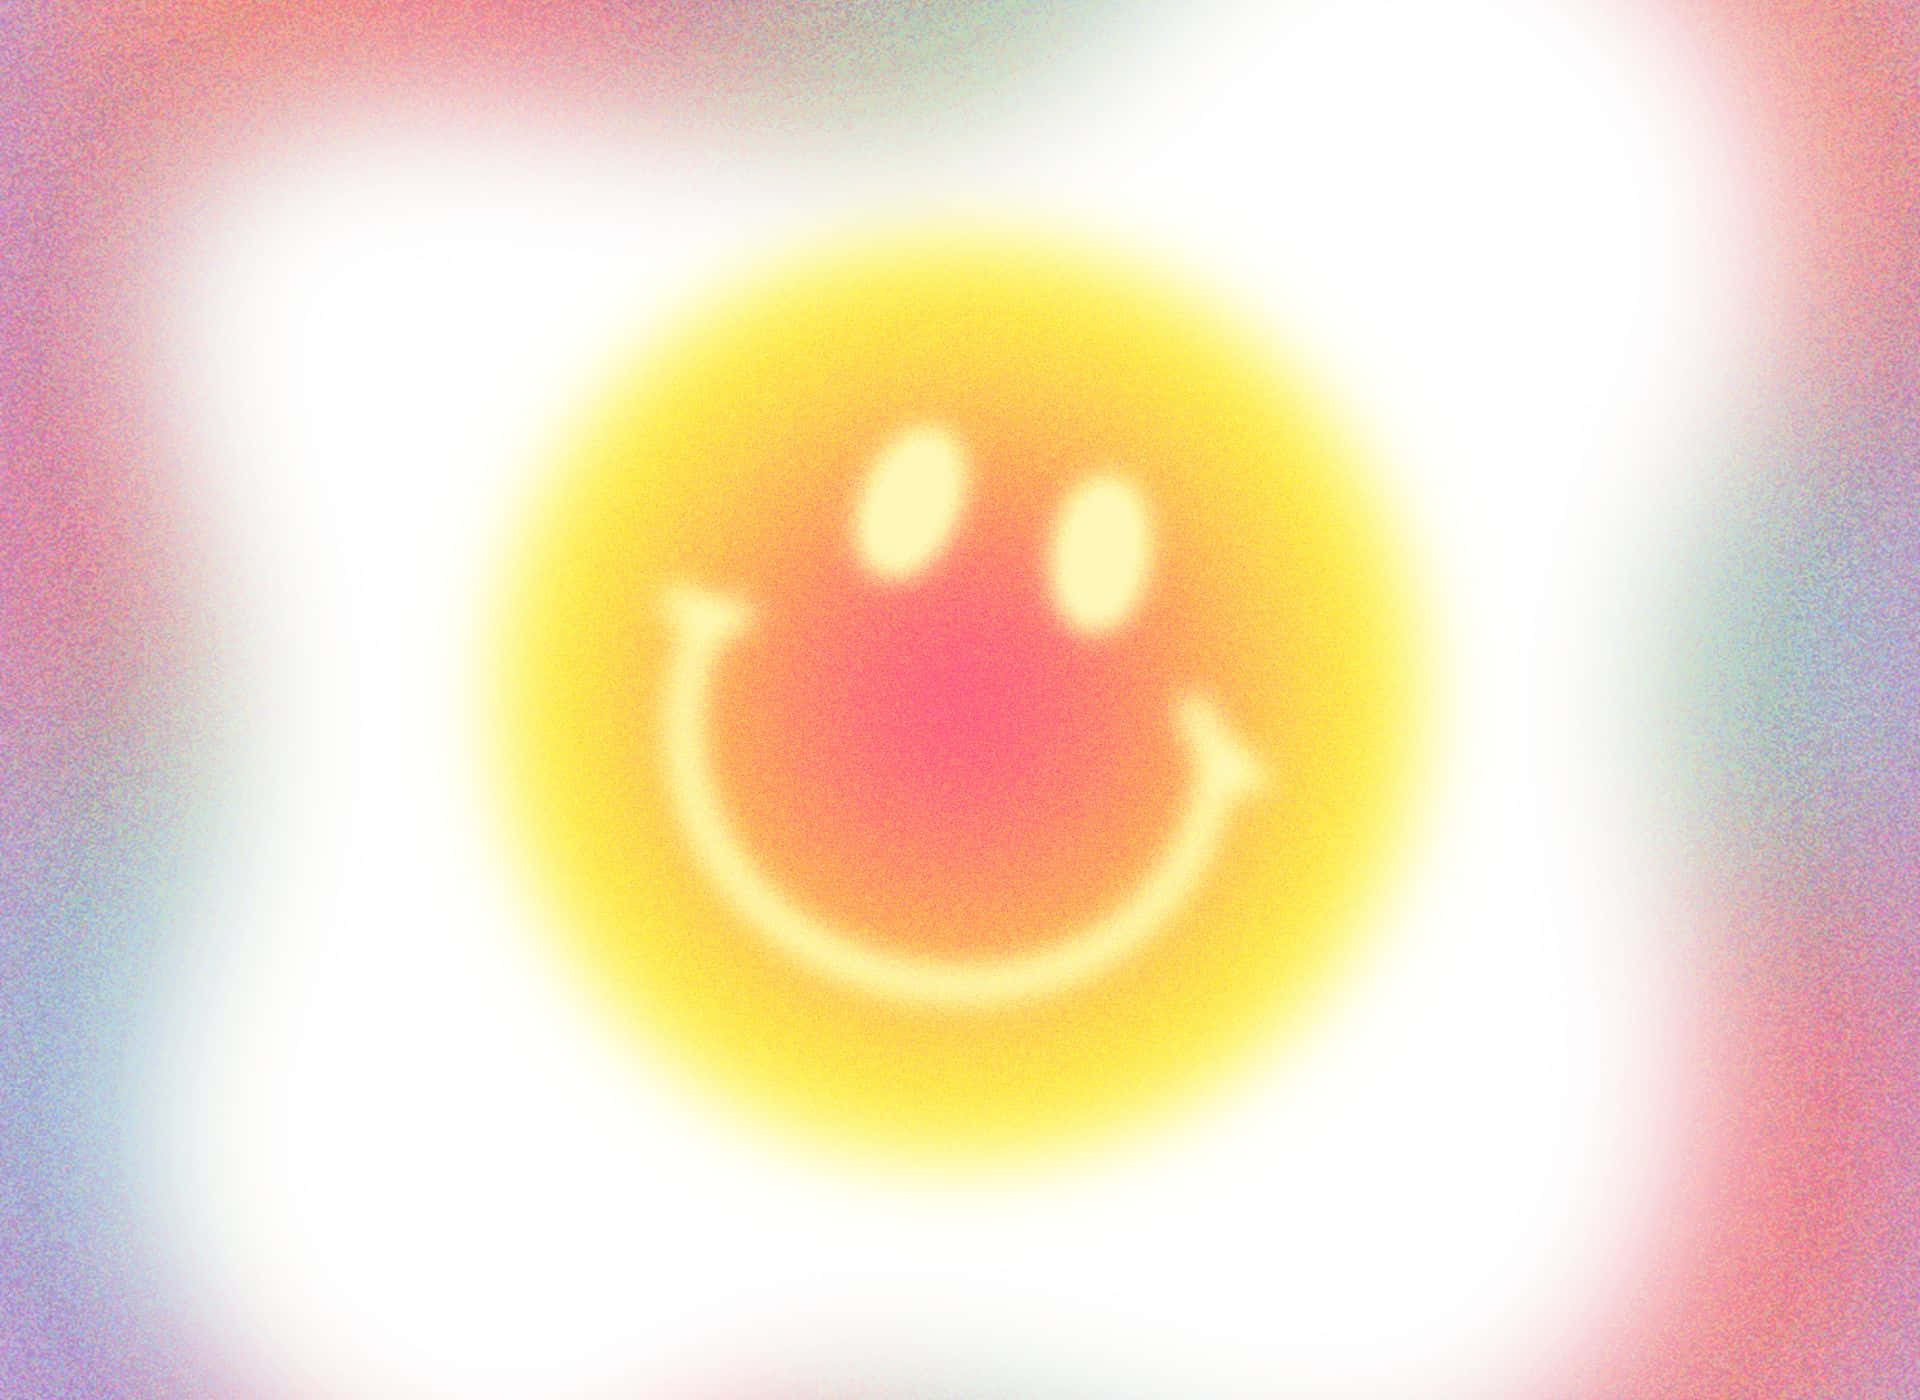 Red And Yellow Smiley With White Aura Background